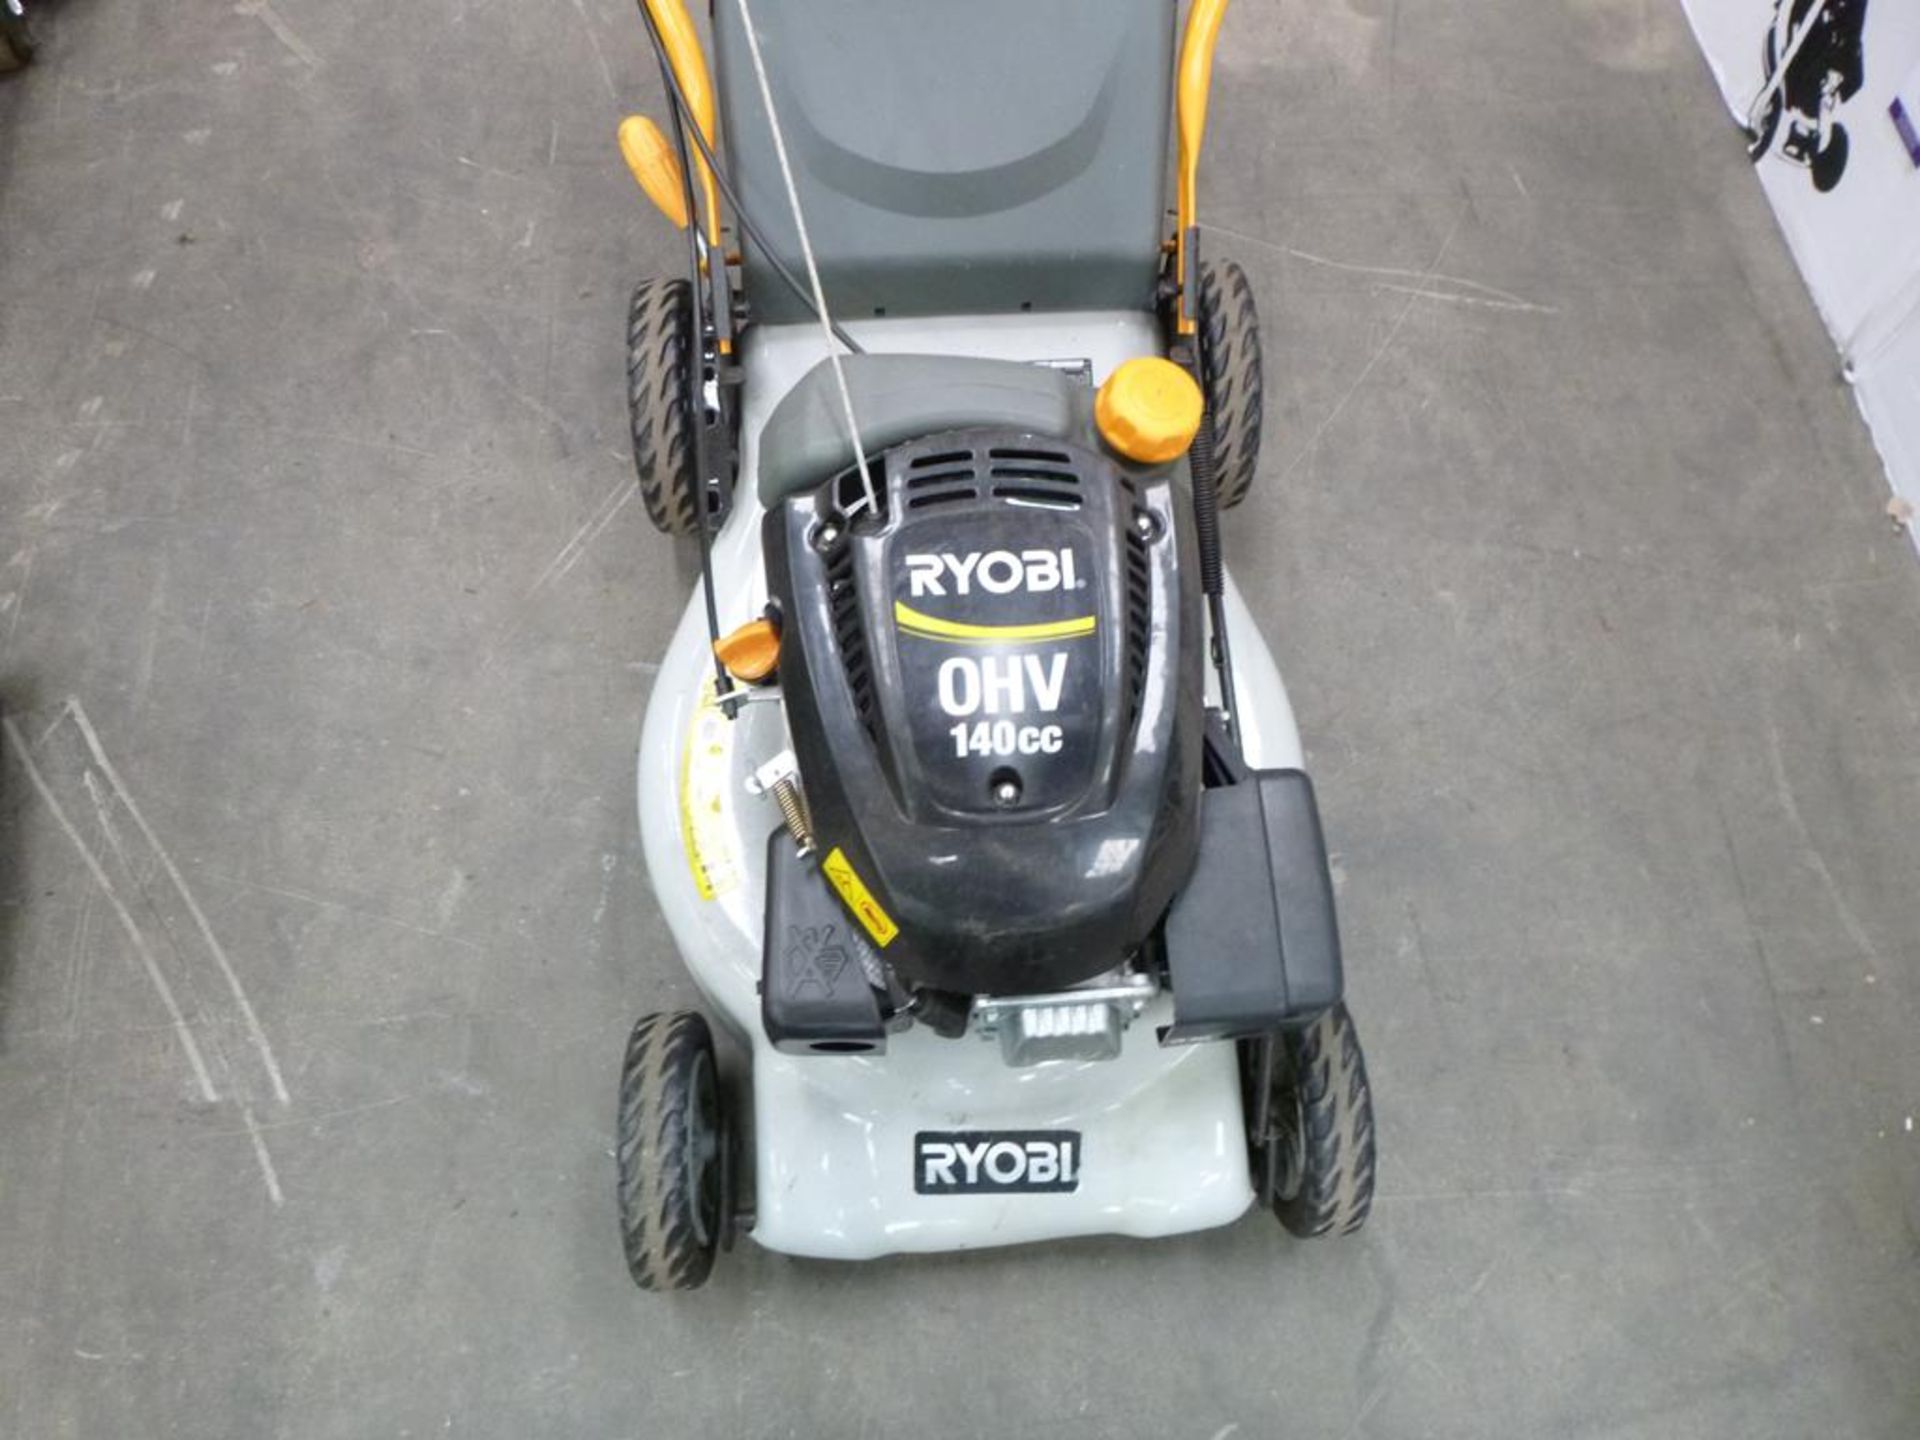 A Reconditioned Ryobi OHV 140cc Power Drive Rotary Lawnmower. Shop Price £125 - Image 2 of 3